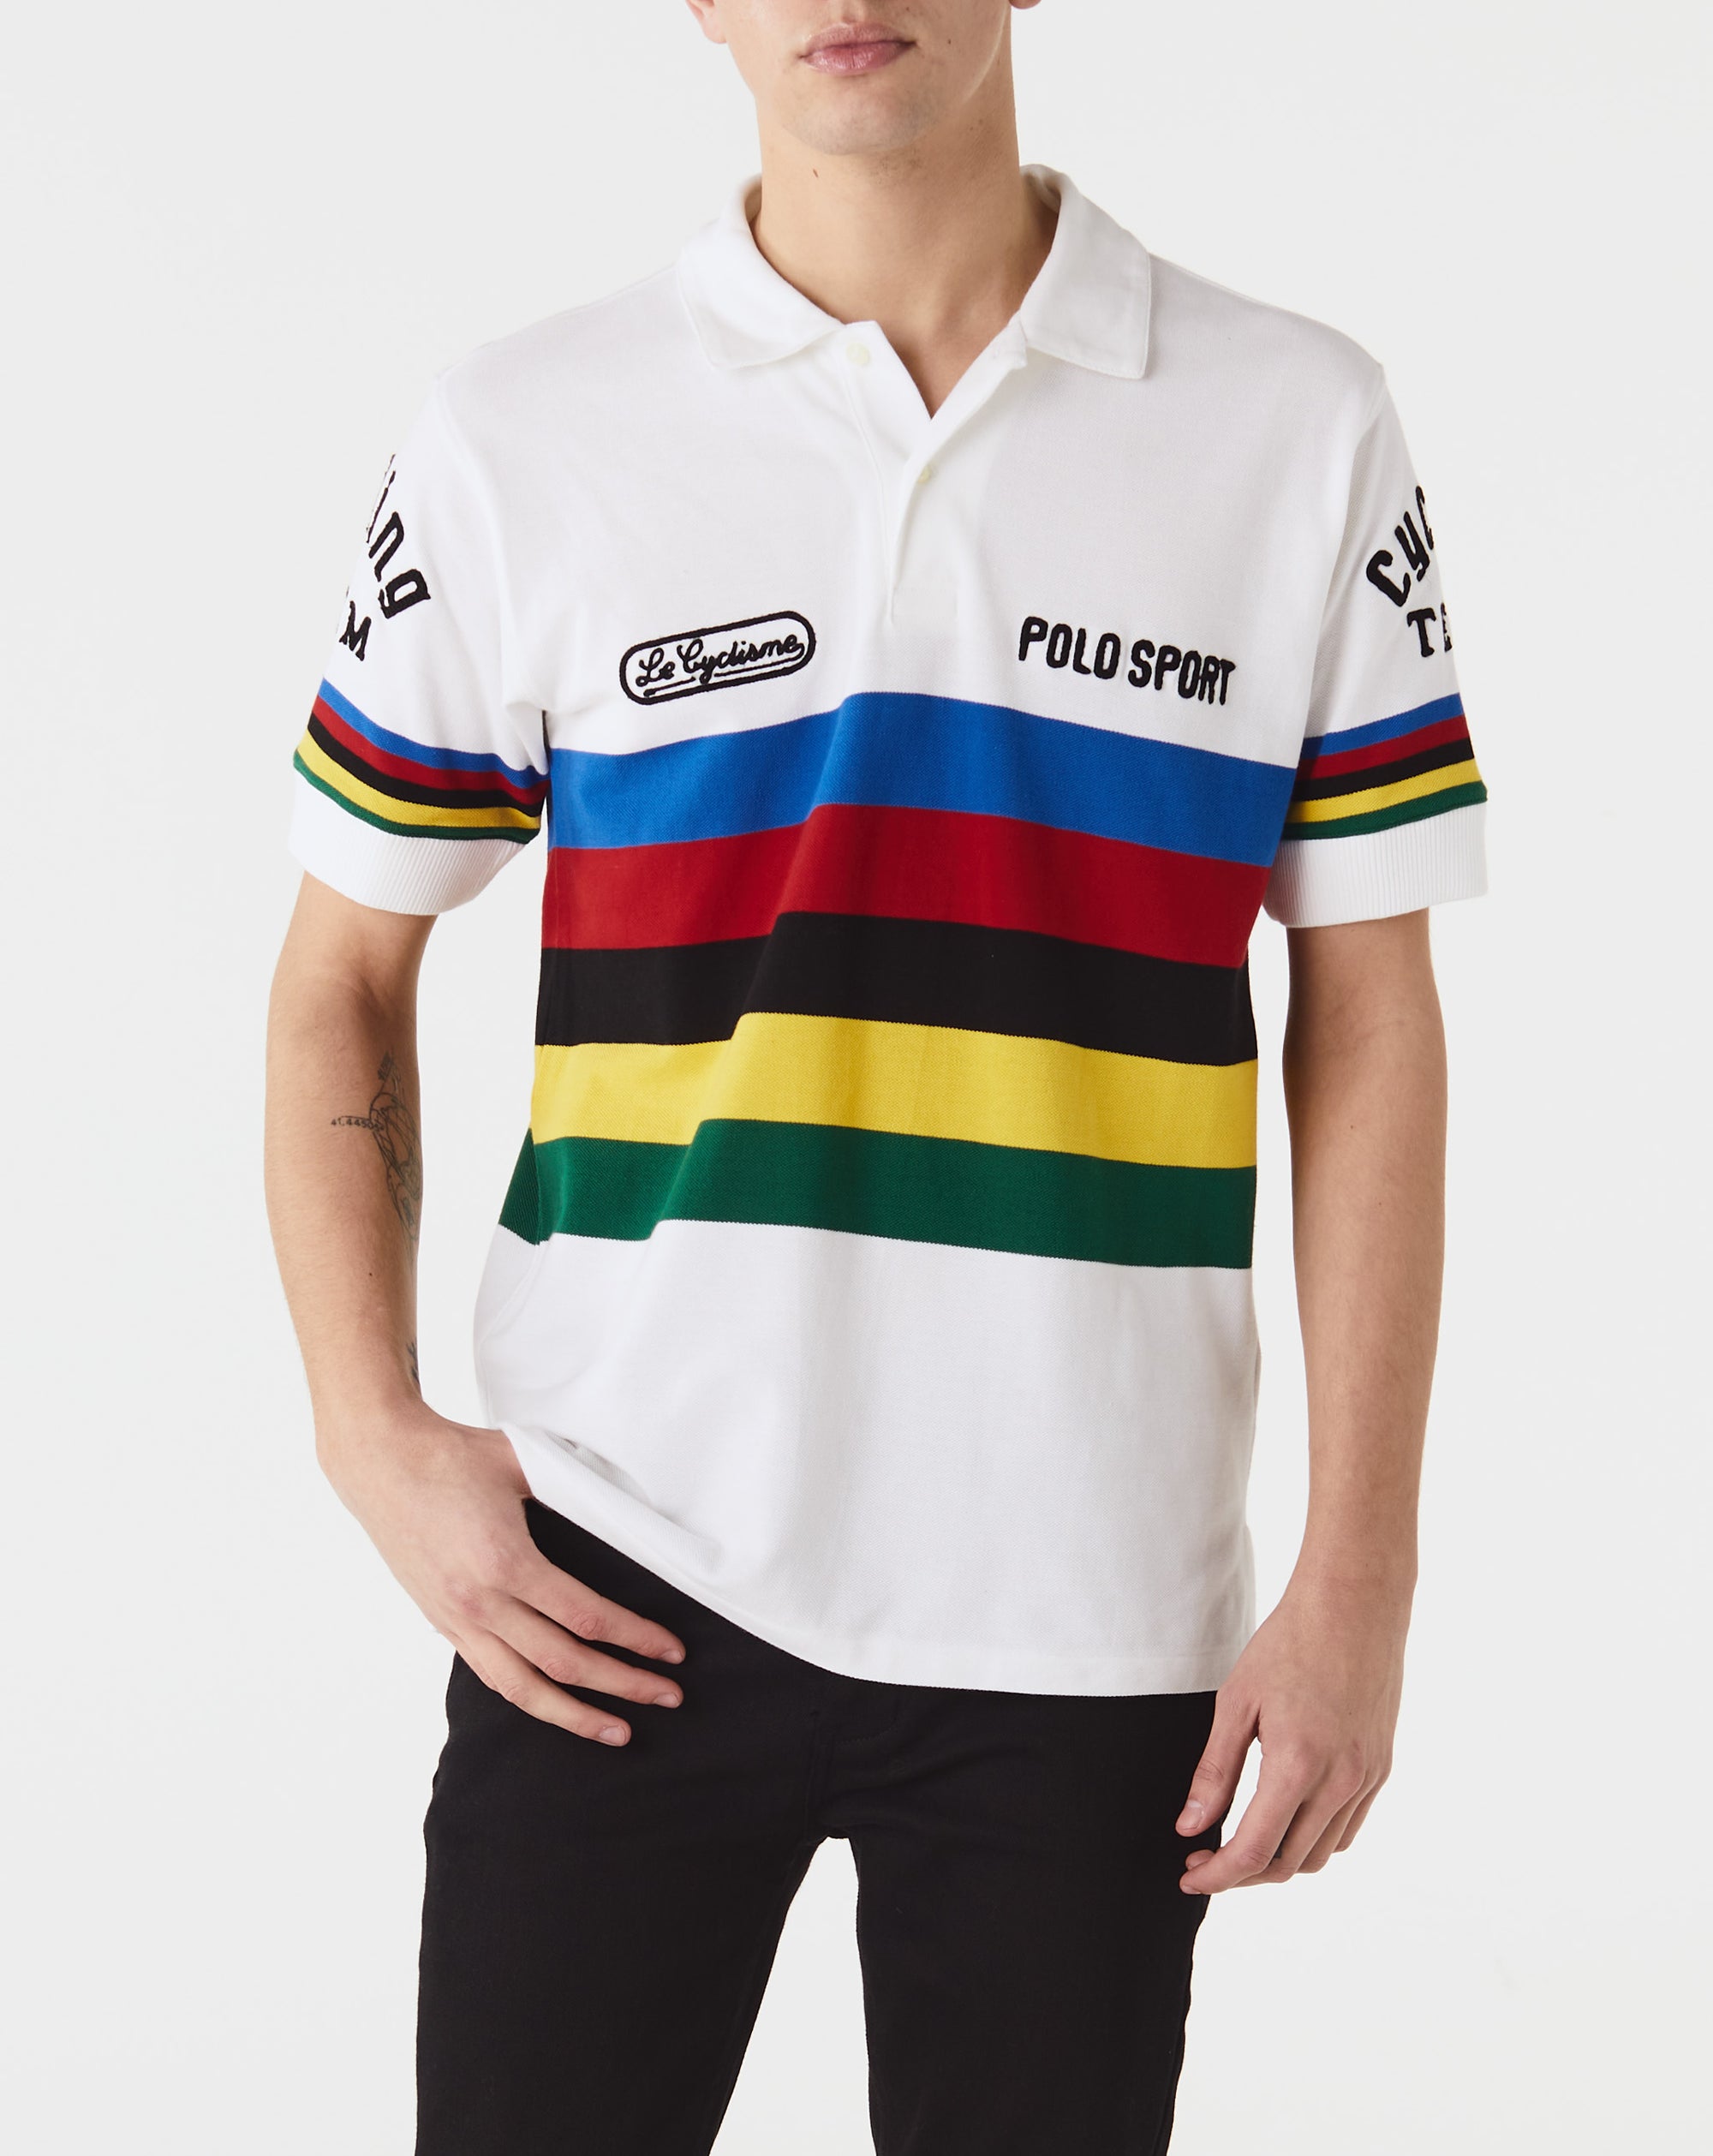 Polo Ralph Lauren Cycling Polo - Rule of Next Apparel